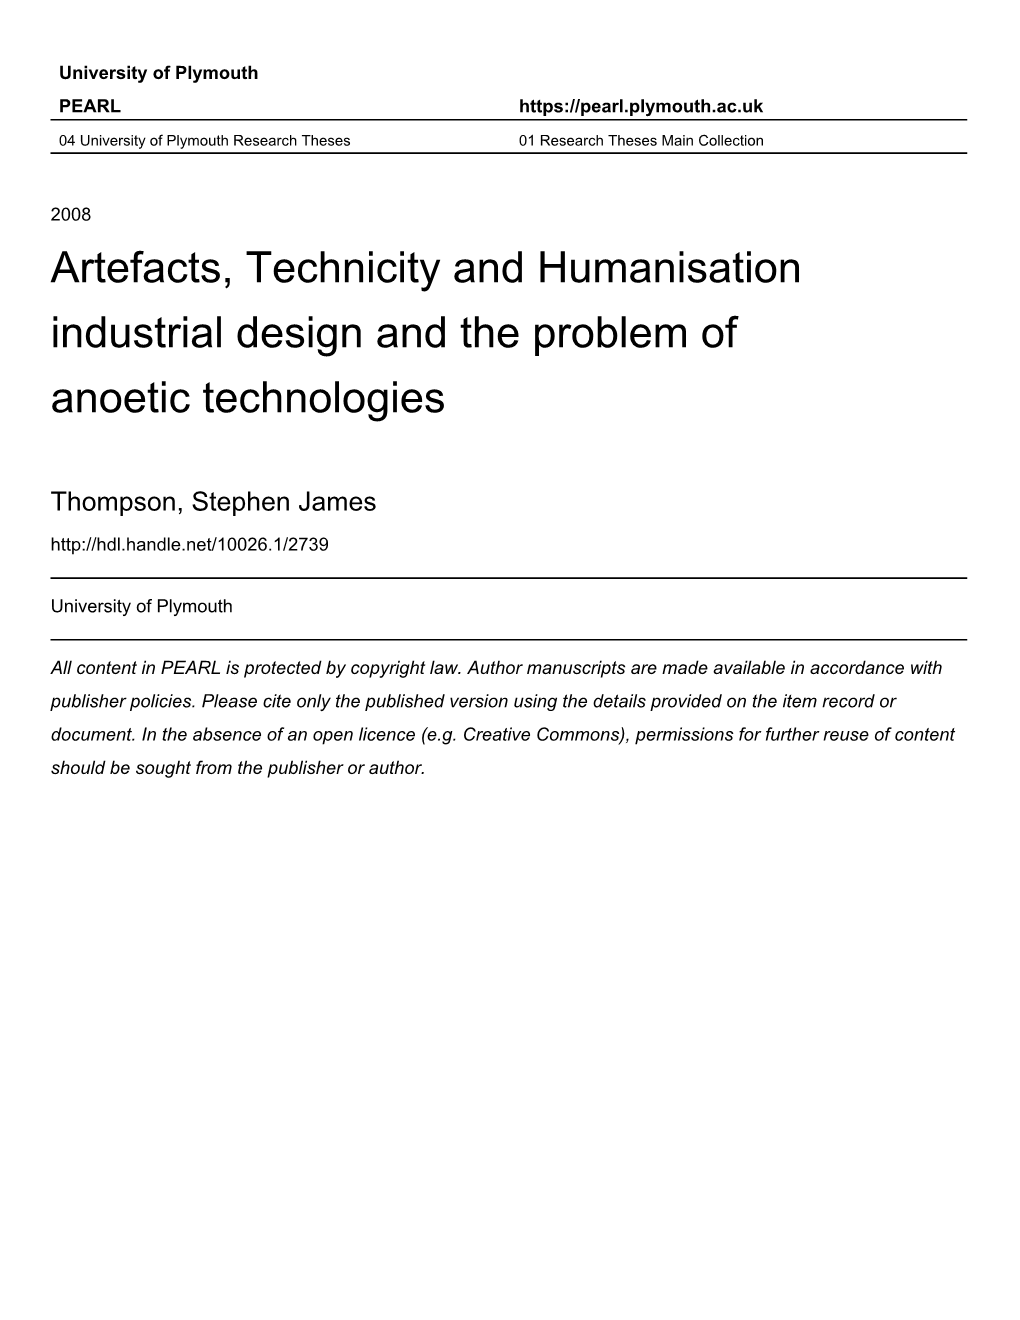 Industrial Design and the Problem of Anoetic Technologies